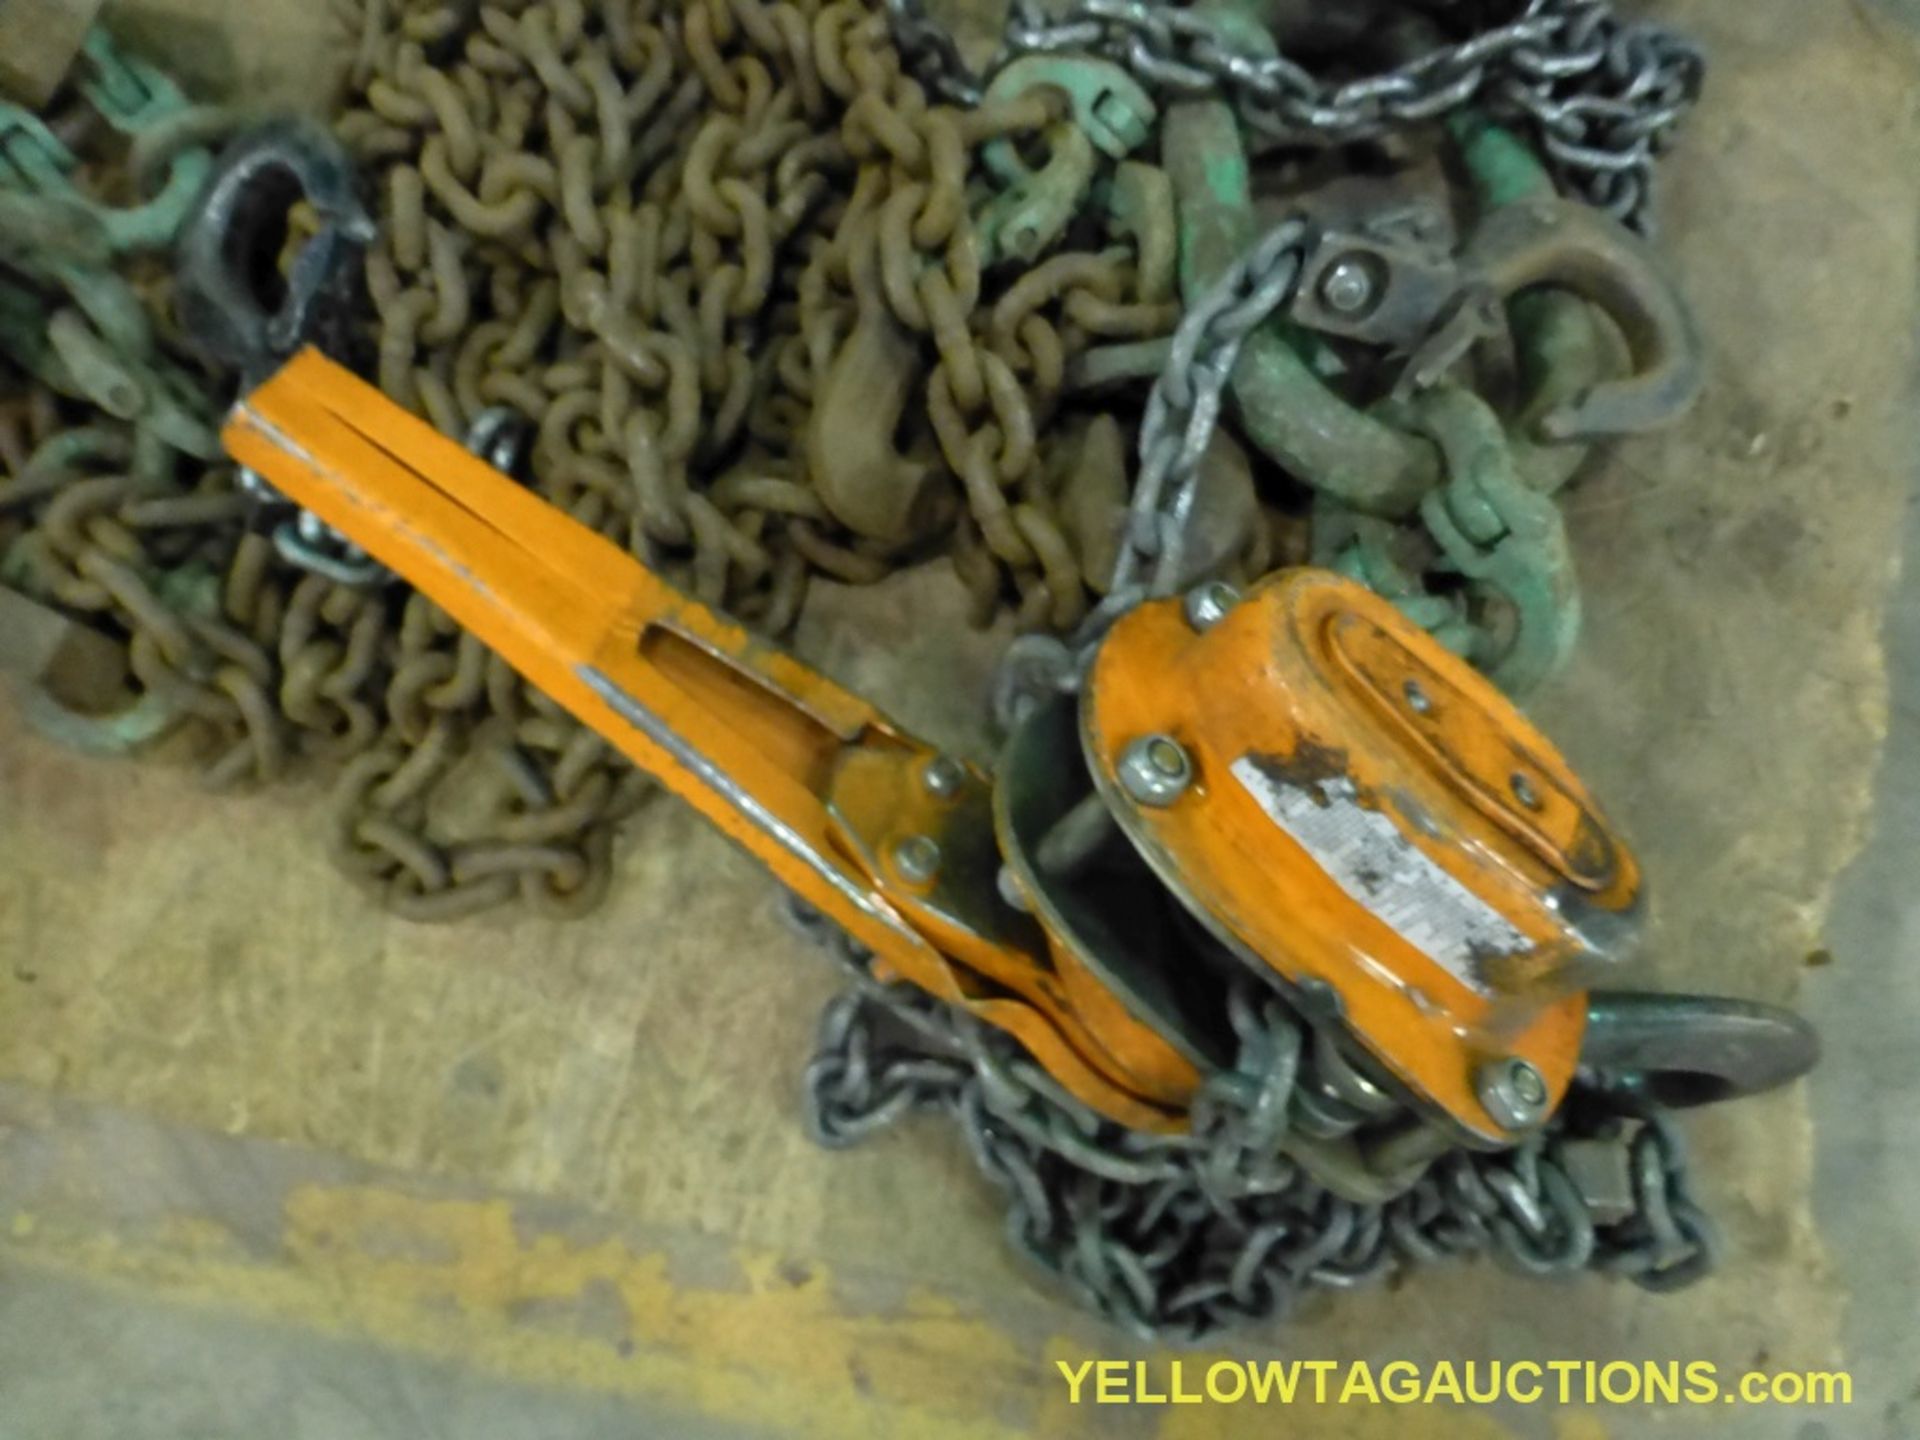 Lot of Chain Hoist and Lifting Chains - Image 4 of 5